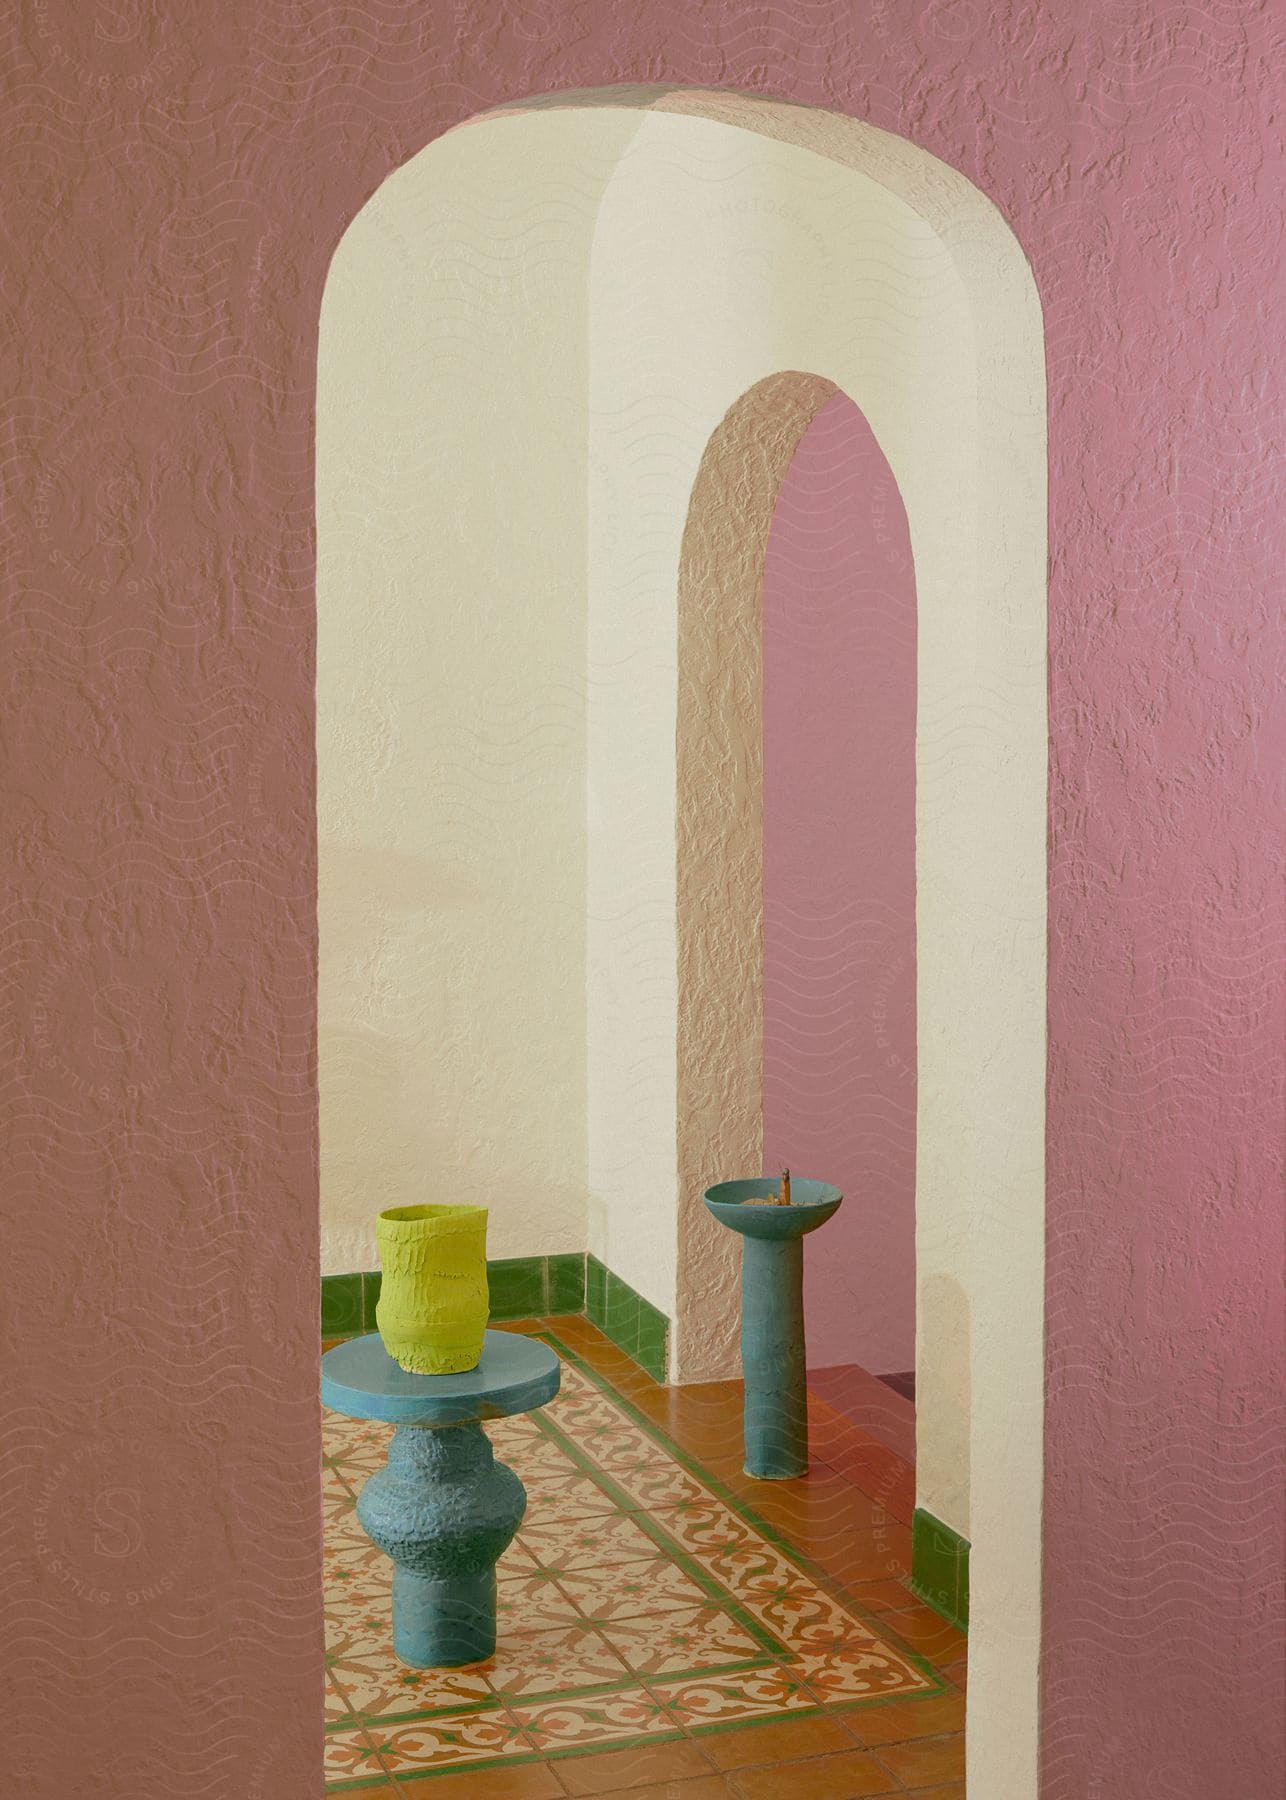 Arched doorway with textured walls in pastel colors, featuring a patterned tile floor and two modern candle holders.Arched doorway with textured walls in pastel colors, featuring a patterned tile floor and two modern candle holders.